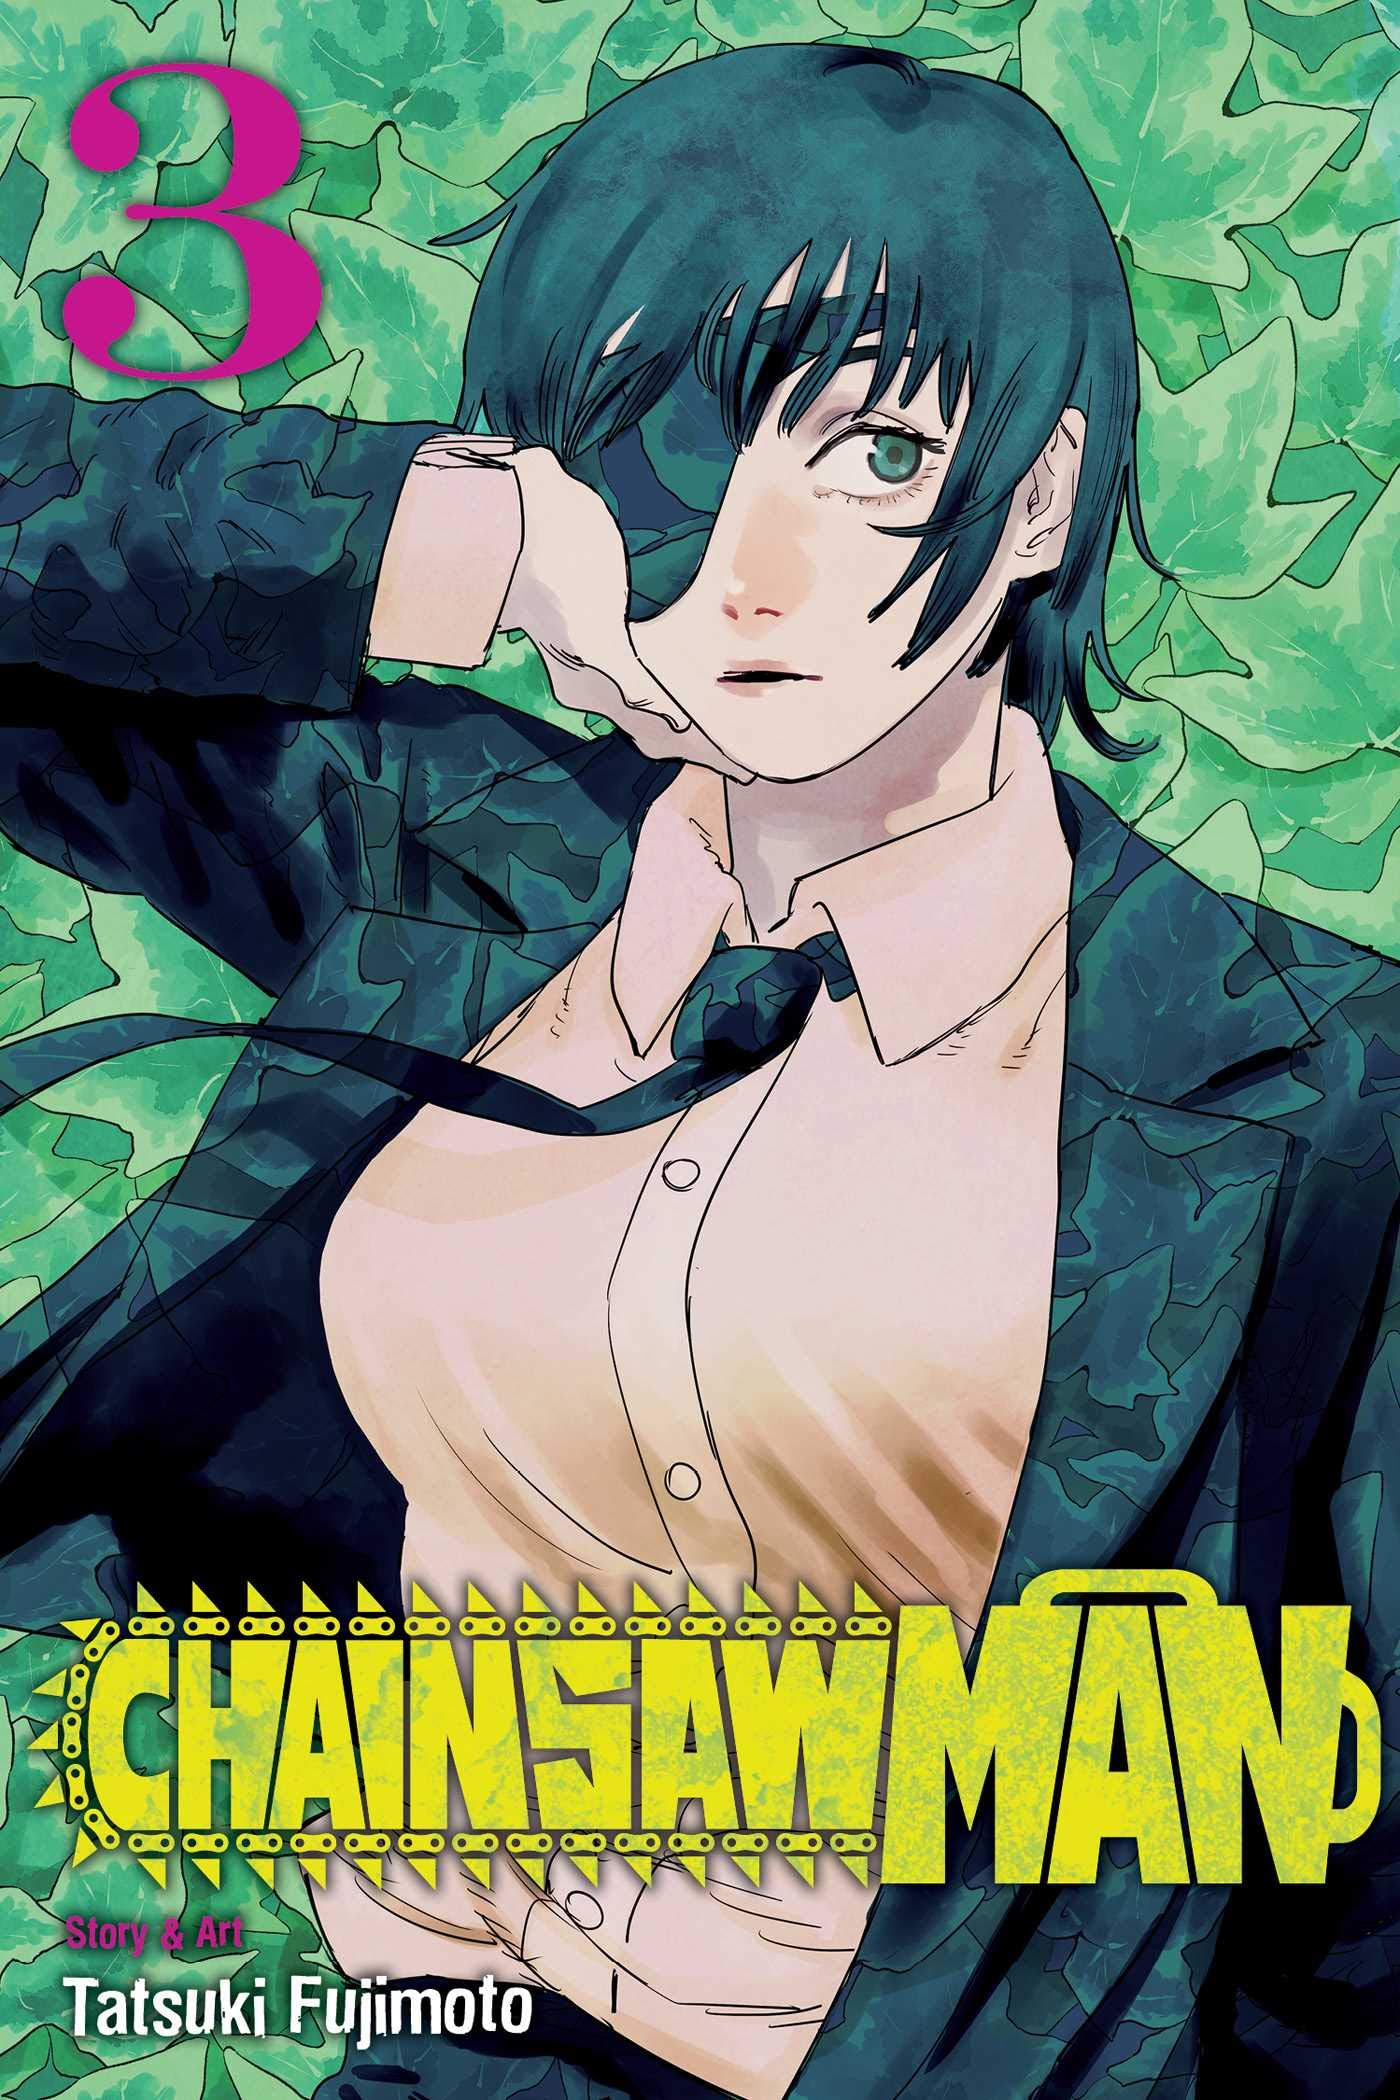 Daily reminder that Chainsaw Man Ending 3 is the best ending